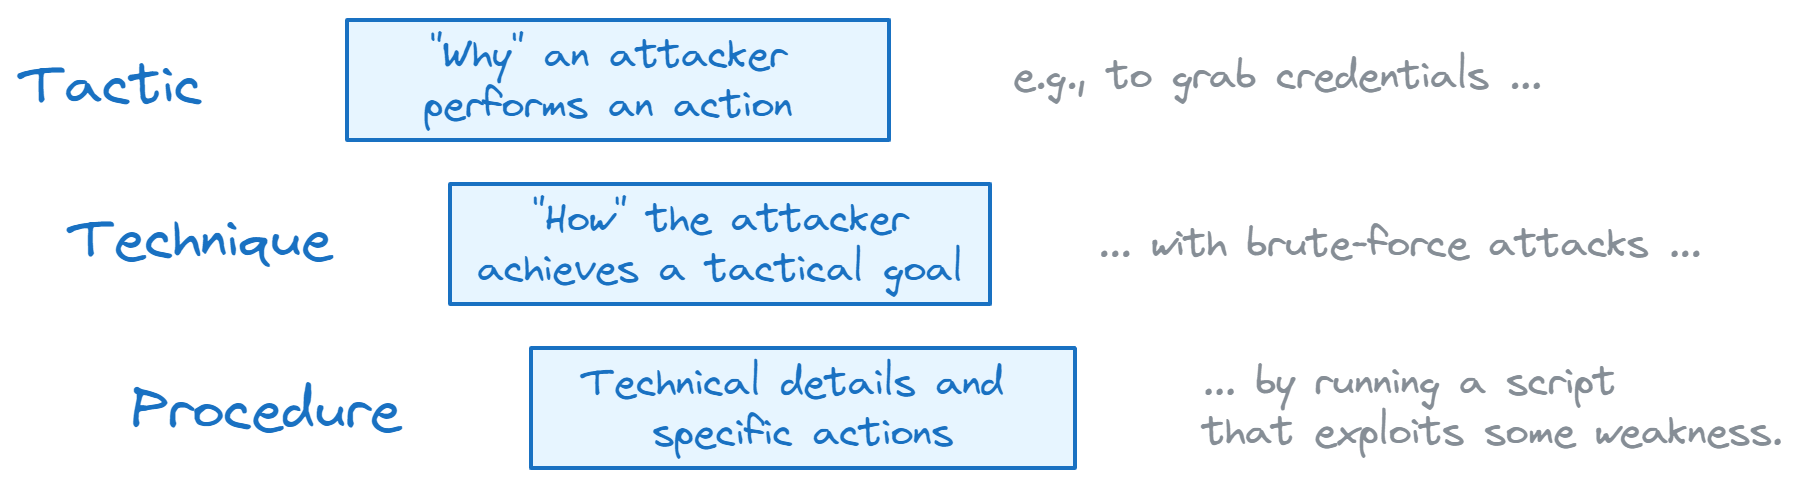 TTP-based threat hunting with Dynatrace: tactic, technique, procedure